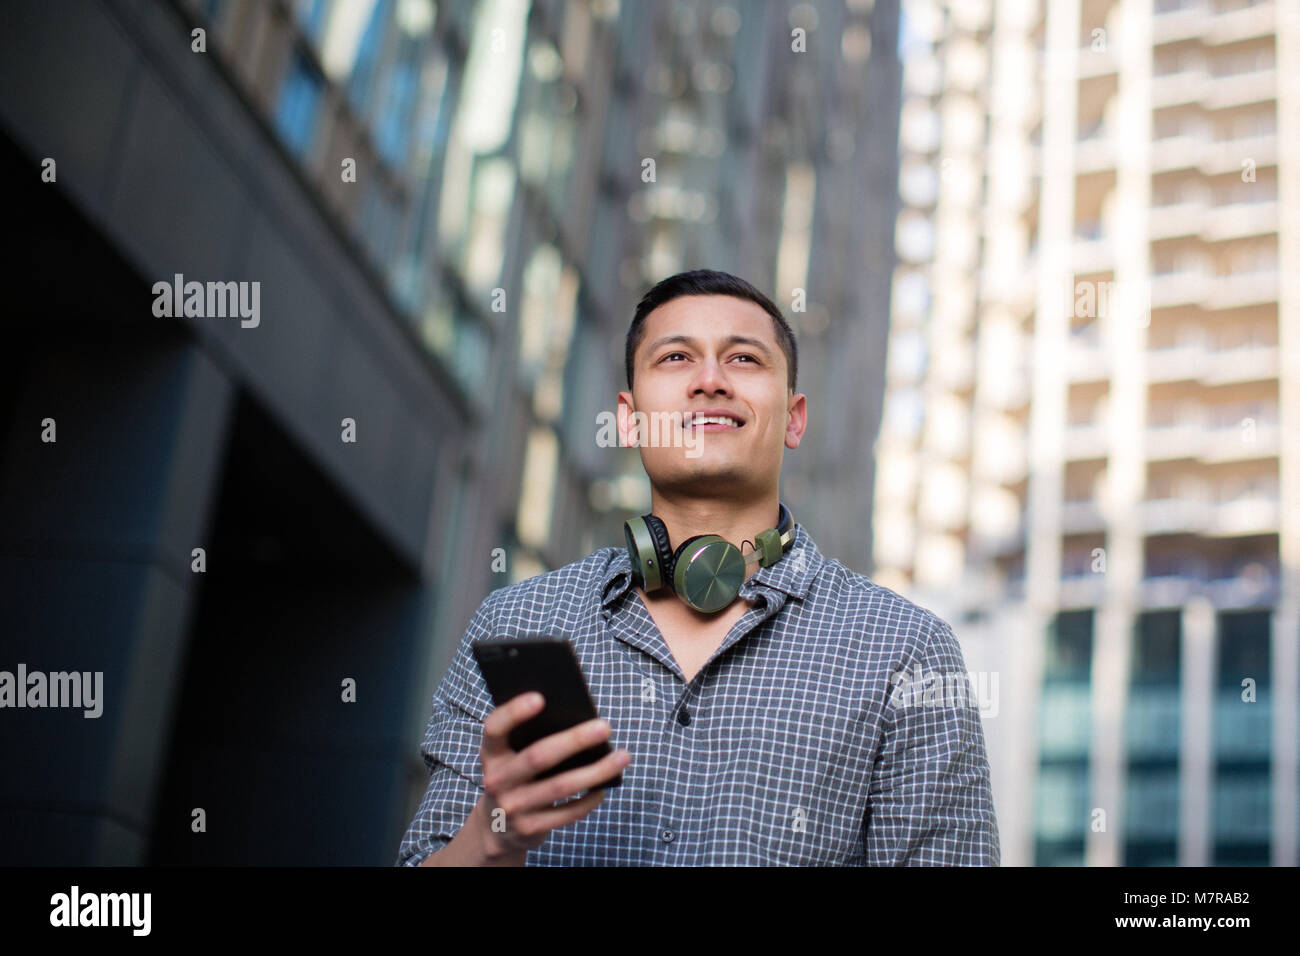 Young adult male with smartphone in city Stock Photo